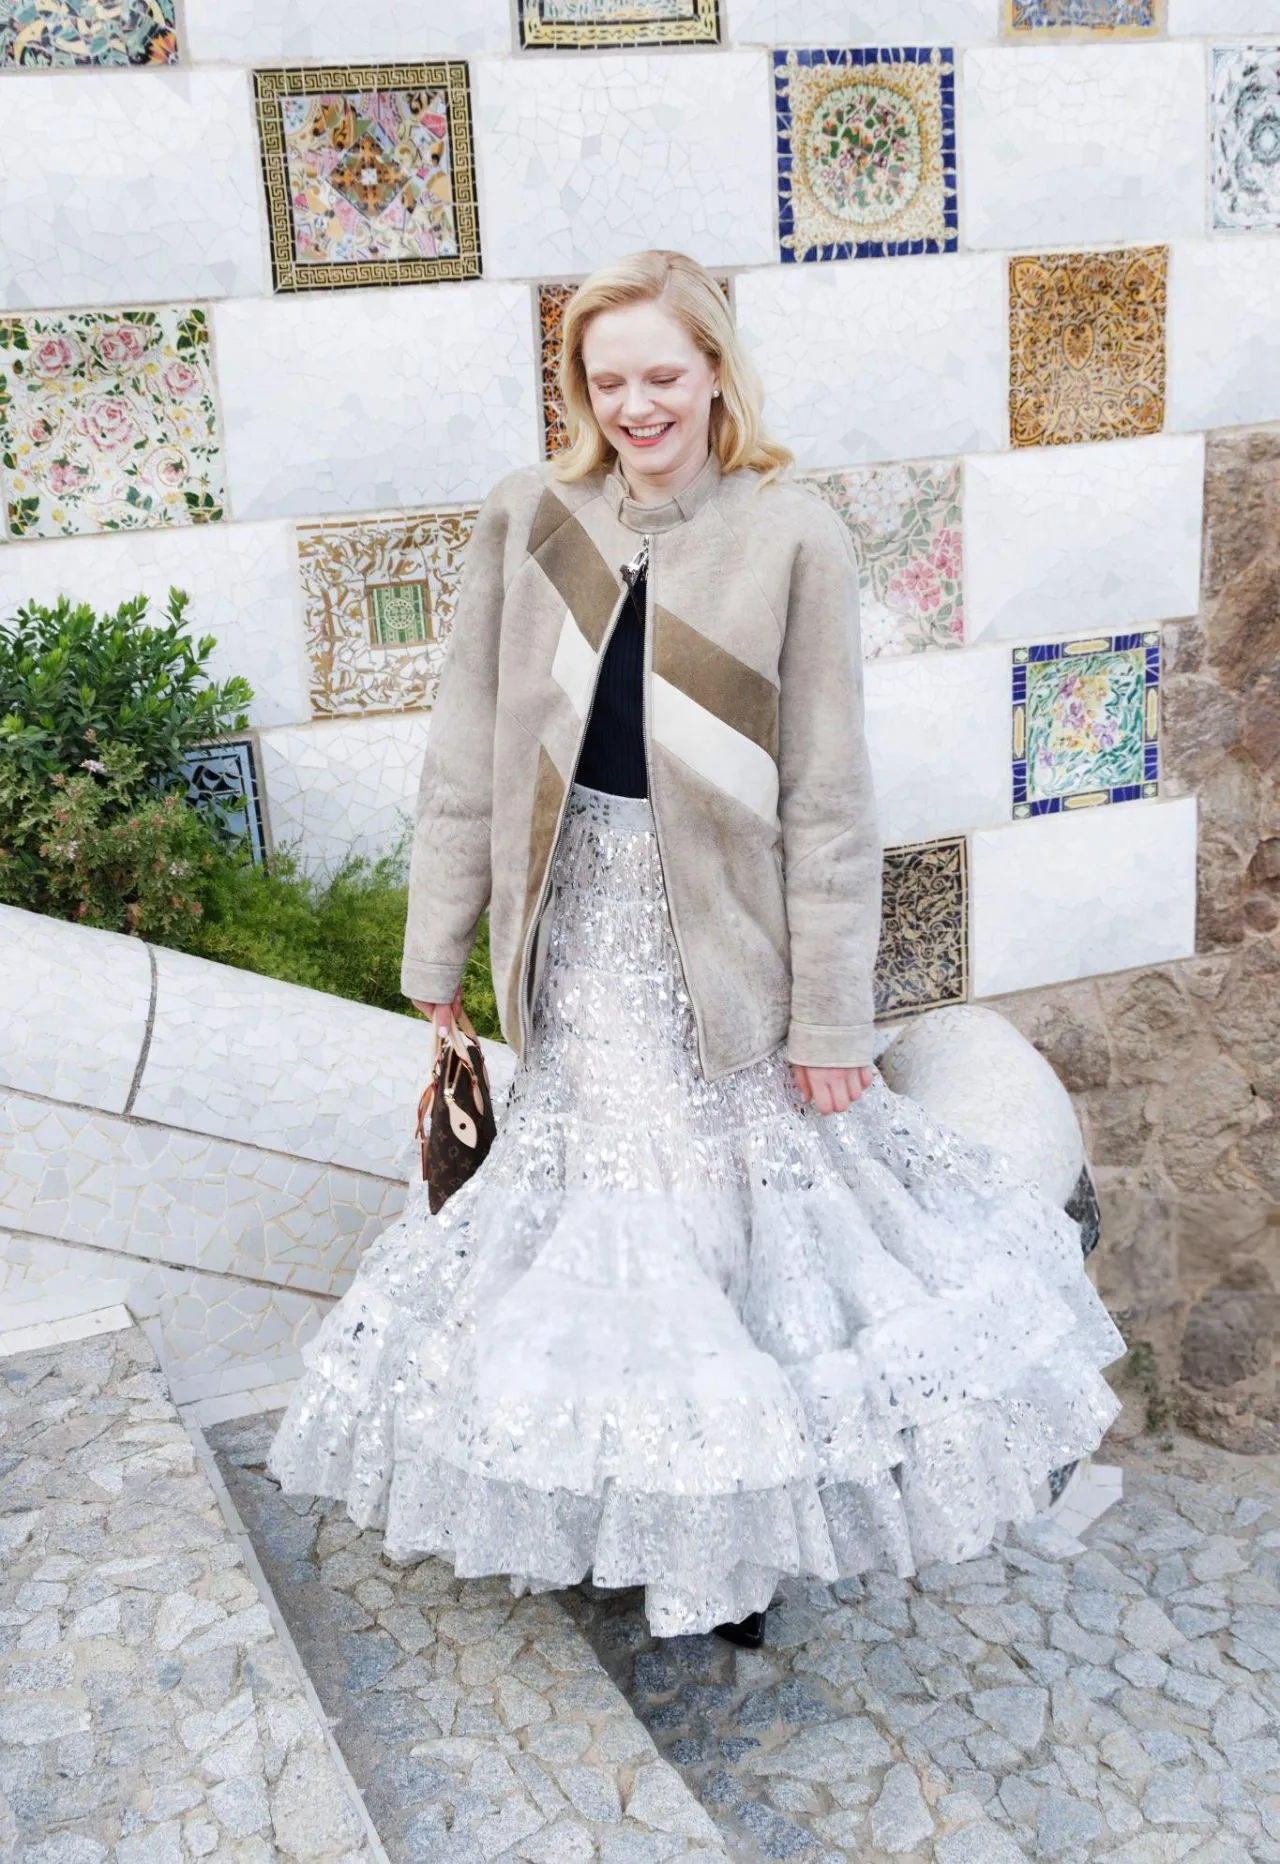 EMMA LAIRD AT LOUIS VUITTON PHOTOCALL FASHION SHOW IN BARCELONA6